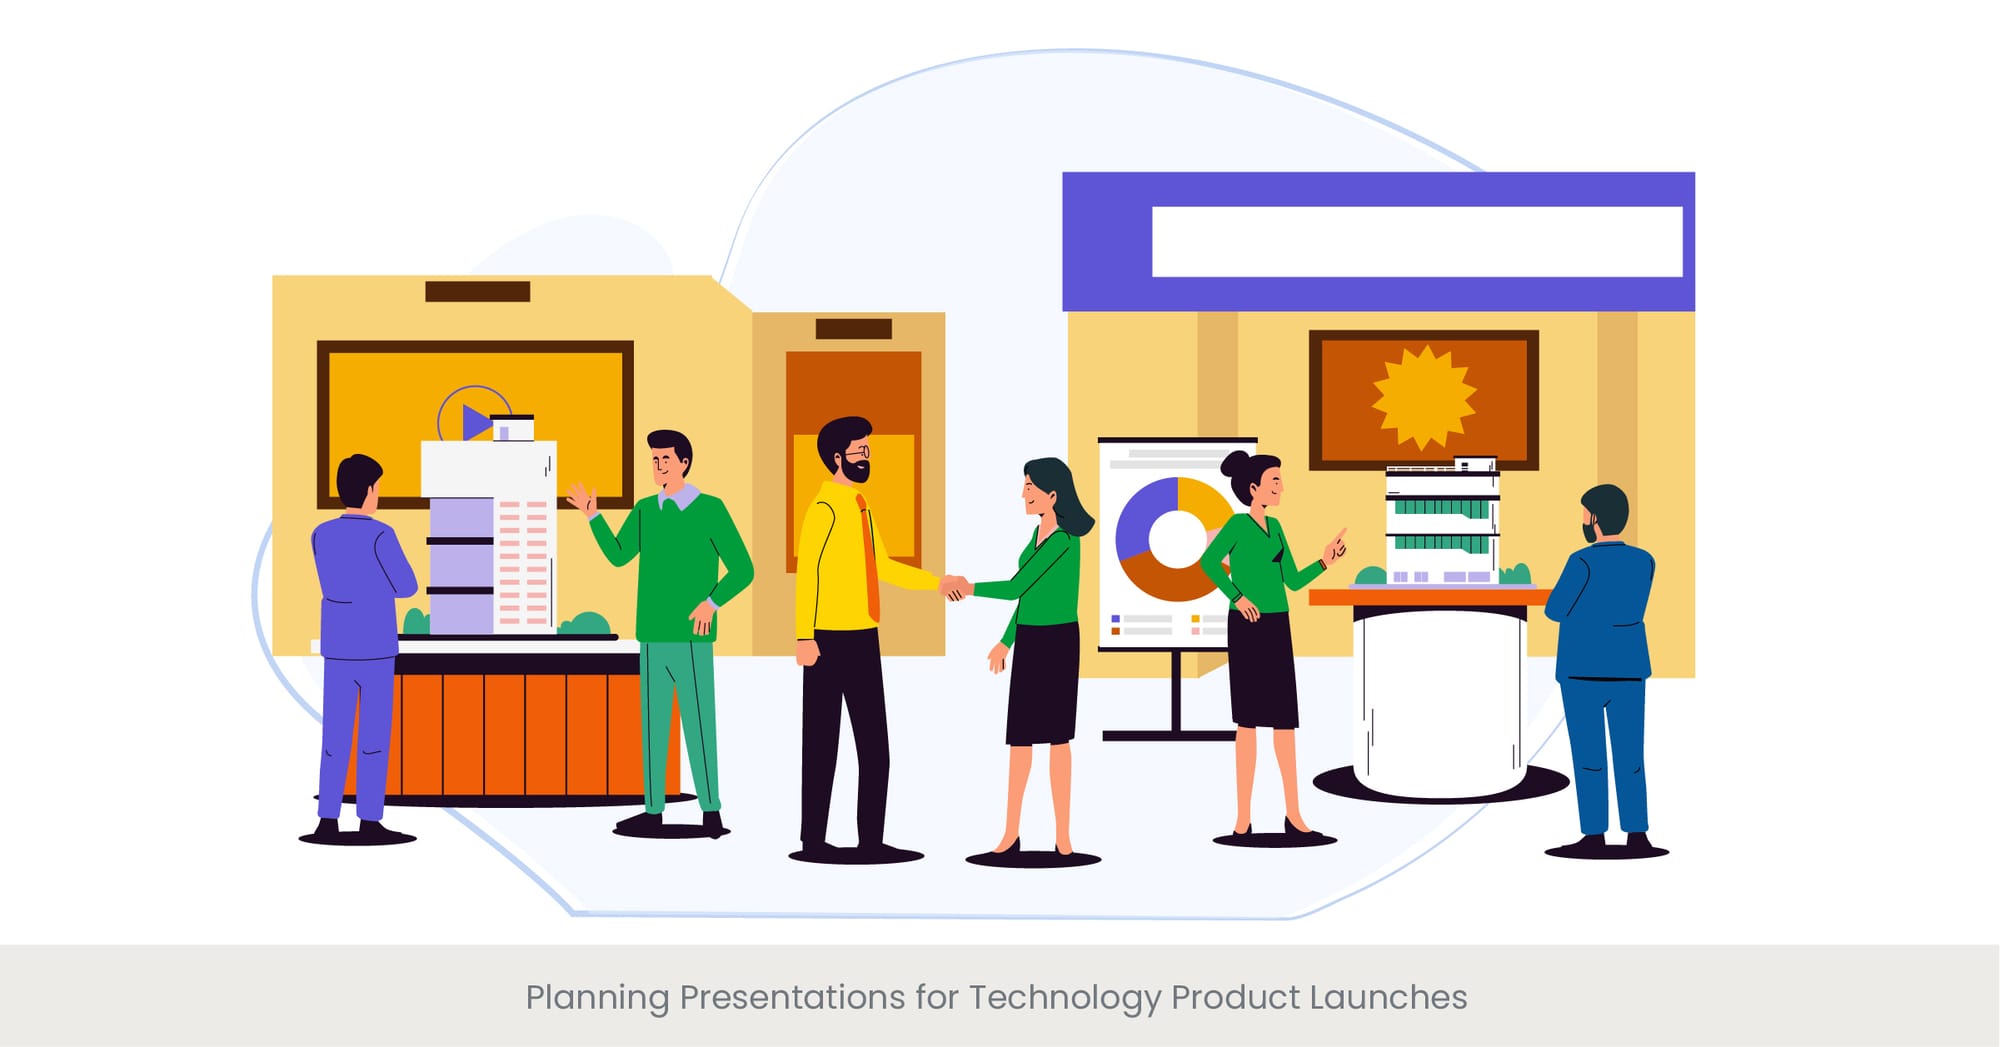 Planning Presentations for Technology Product Launches